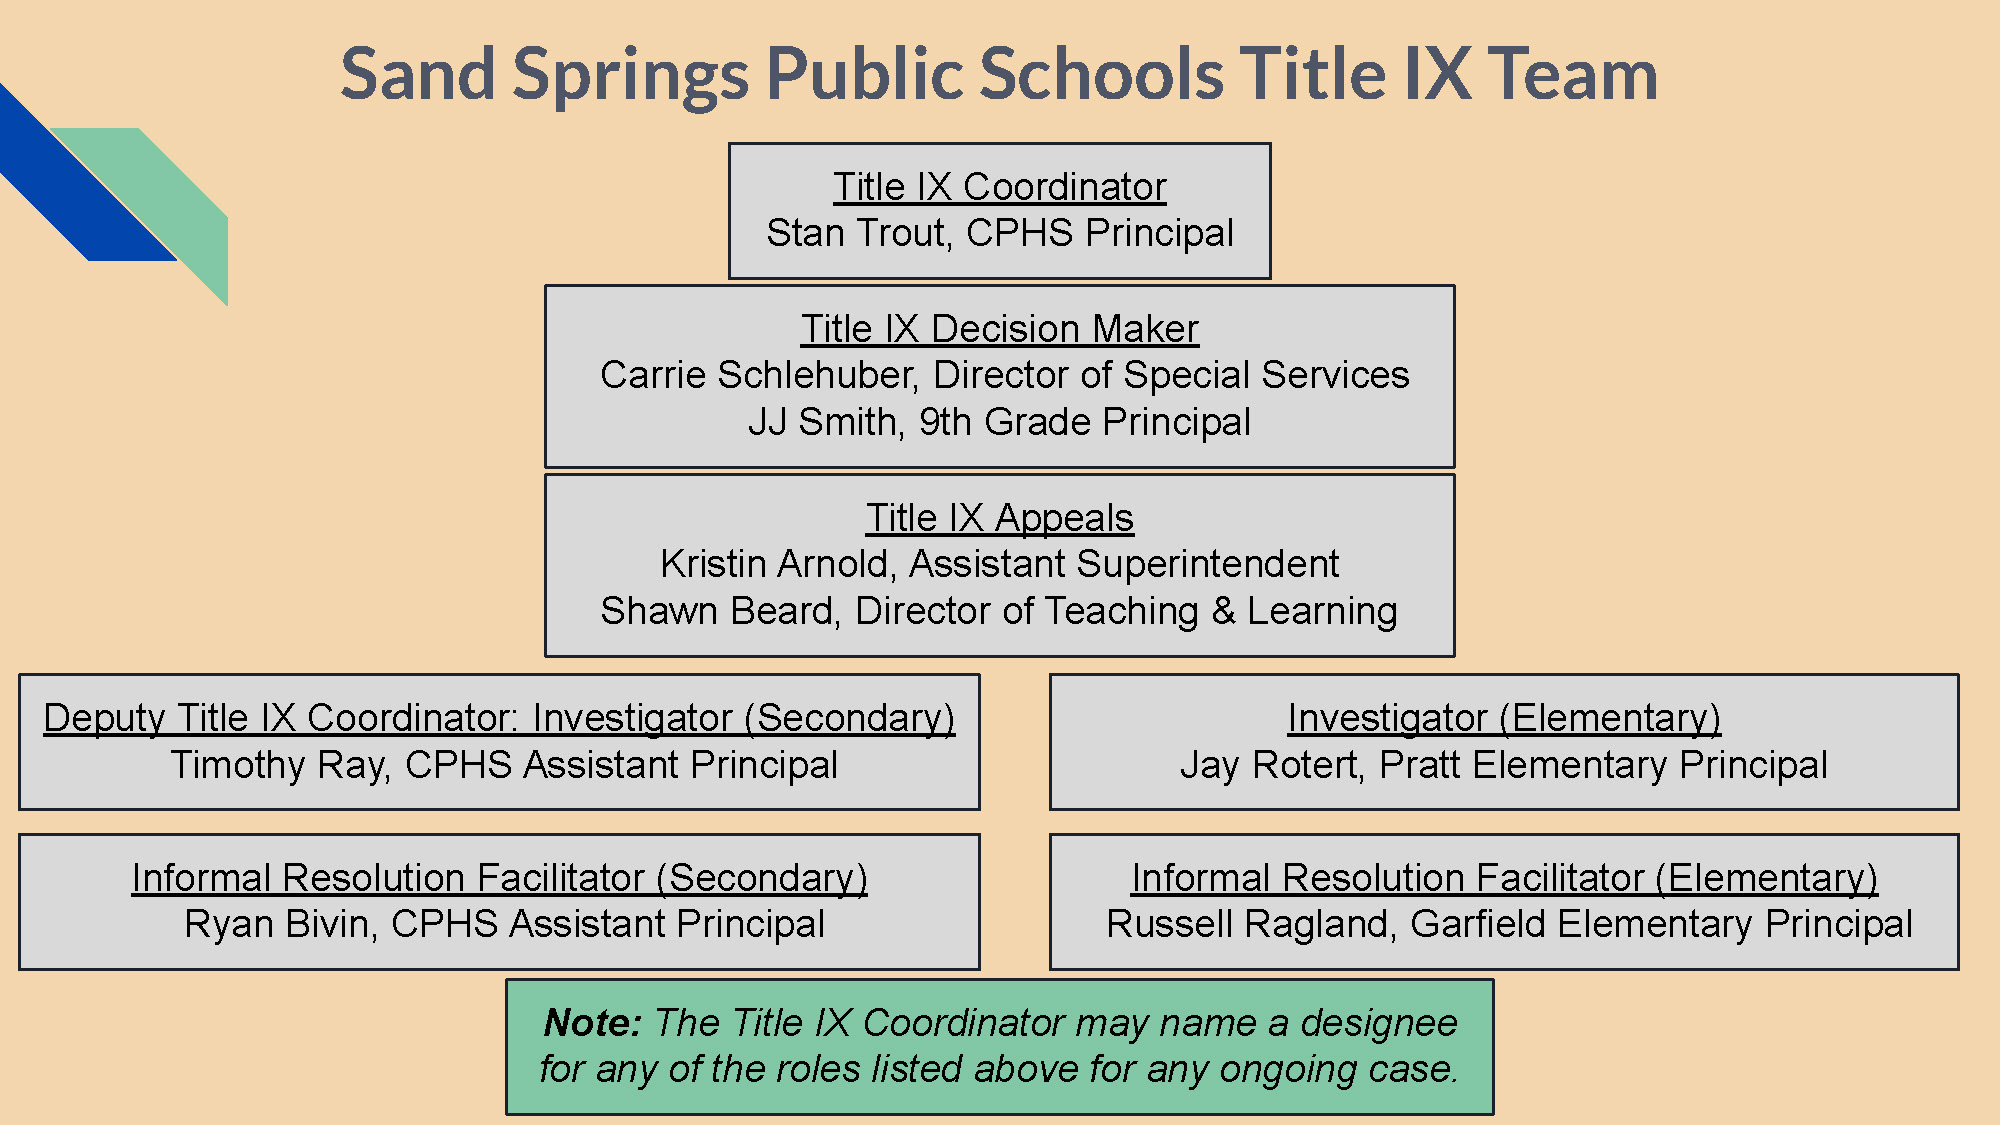 Sand Springs Public Schools Title IX Team Title IX Coordinator Stan Trout, CPHS Principal Deputy Title IX Coordinator: Investigator (Secondary) Timothy Ray, CPHS Assistant Principal Investigator (Elementary) Jay Rotert, Pratt Elementary Principal Title IX Decision Maker Carrie Schlehuber, Director of Special Services JJ Smith, 9th Grade Principal Title IX Appeals Kristin Arnold, Assistant Superintendent Shawn Beard, Director of Teaching & Learning Informal Resolution Facilitator (Secondary) Ryan Bivin, CPHS Assistant Principal Informal Resolution Facilitator (Elementary) Russell Ragland, Garfield Elementary Principal Note: The Title IX Coordinator may name a designee for any of the roles listed above for any ongoing case.